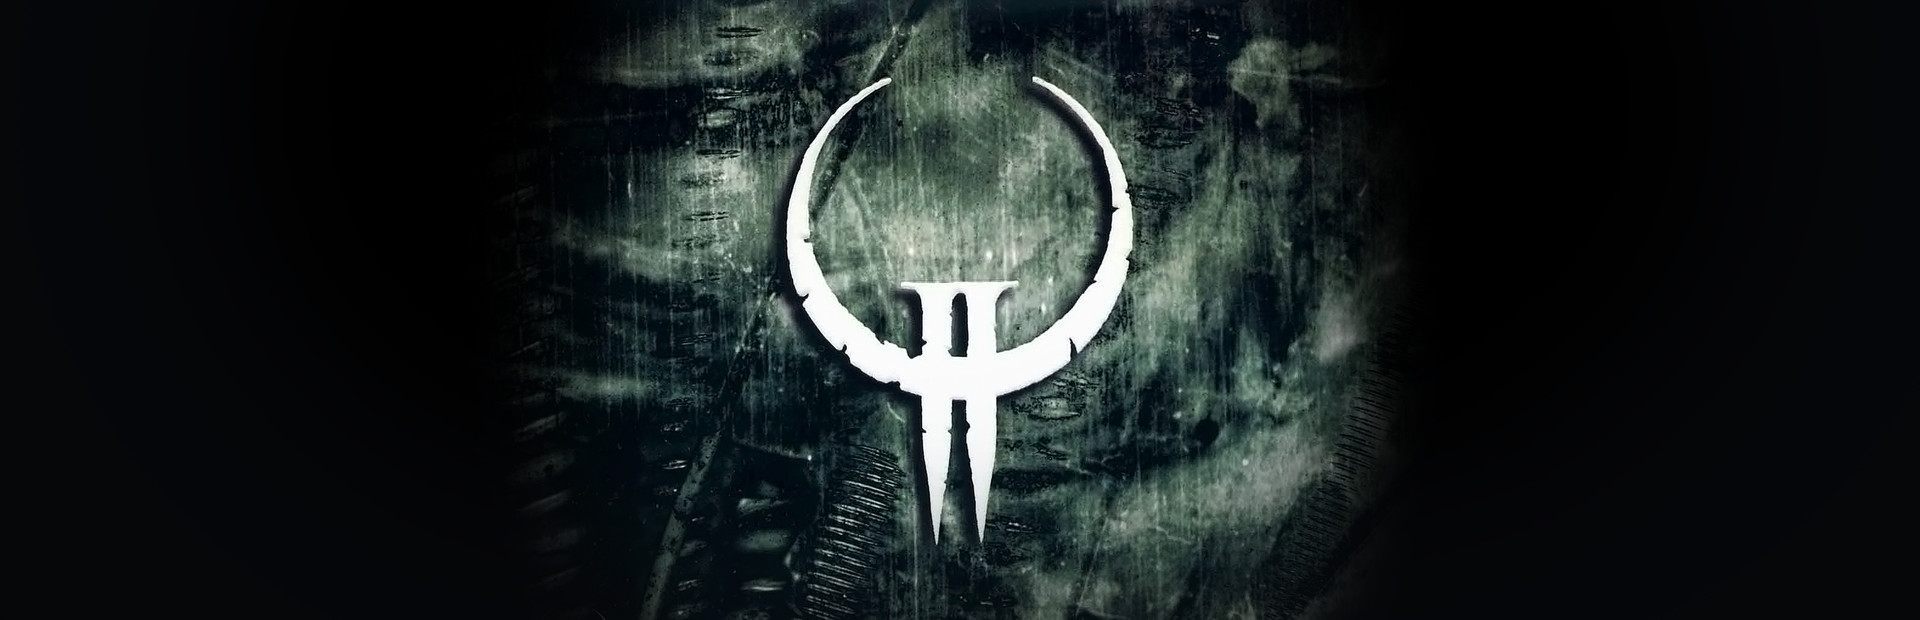 Quake II: The Reckoning cover image